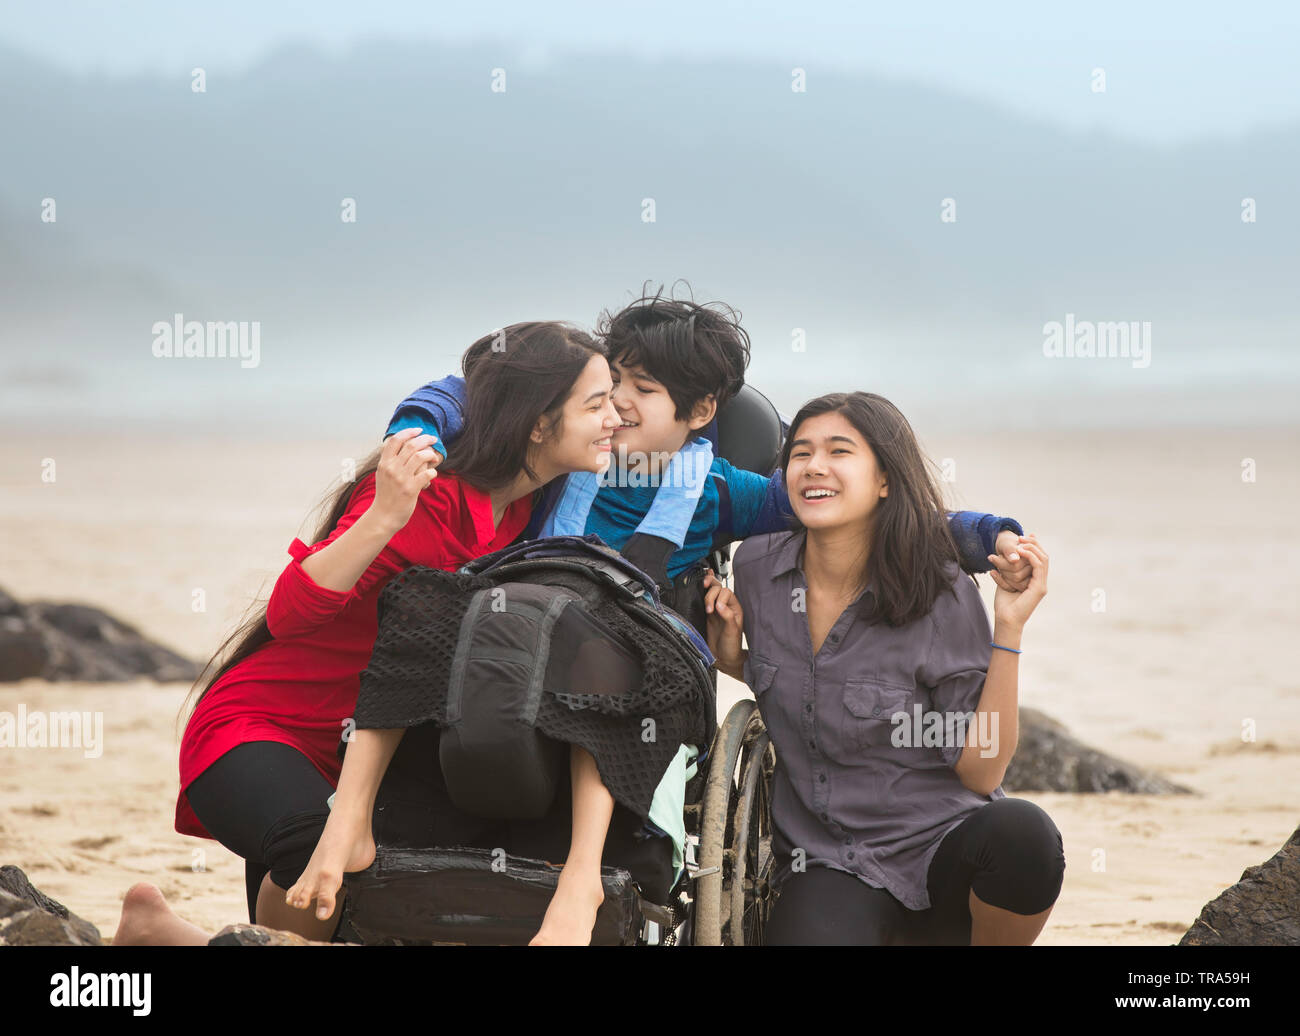 Disabled younger brother in wheelchair laughing and giving older sistesr a hug while they sit together by ocean on misty foggy beach Stock Photo